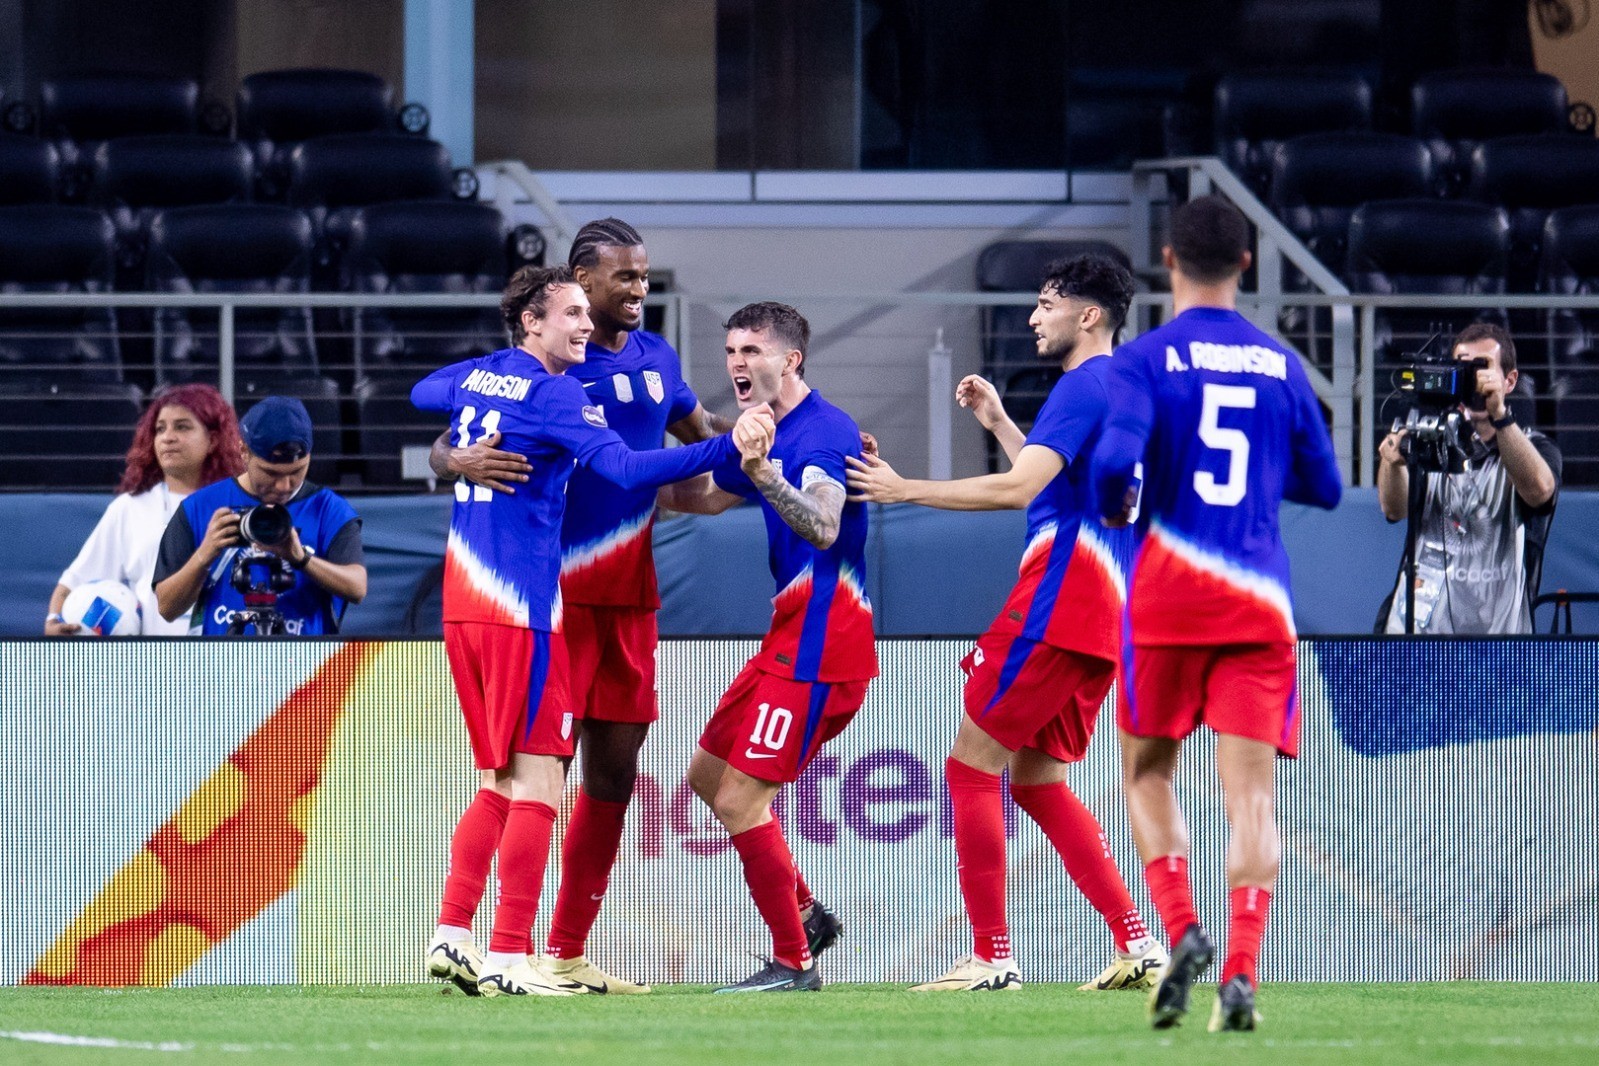 CONCACAF Nations League finalists announced - VIDEO